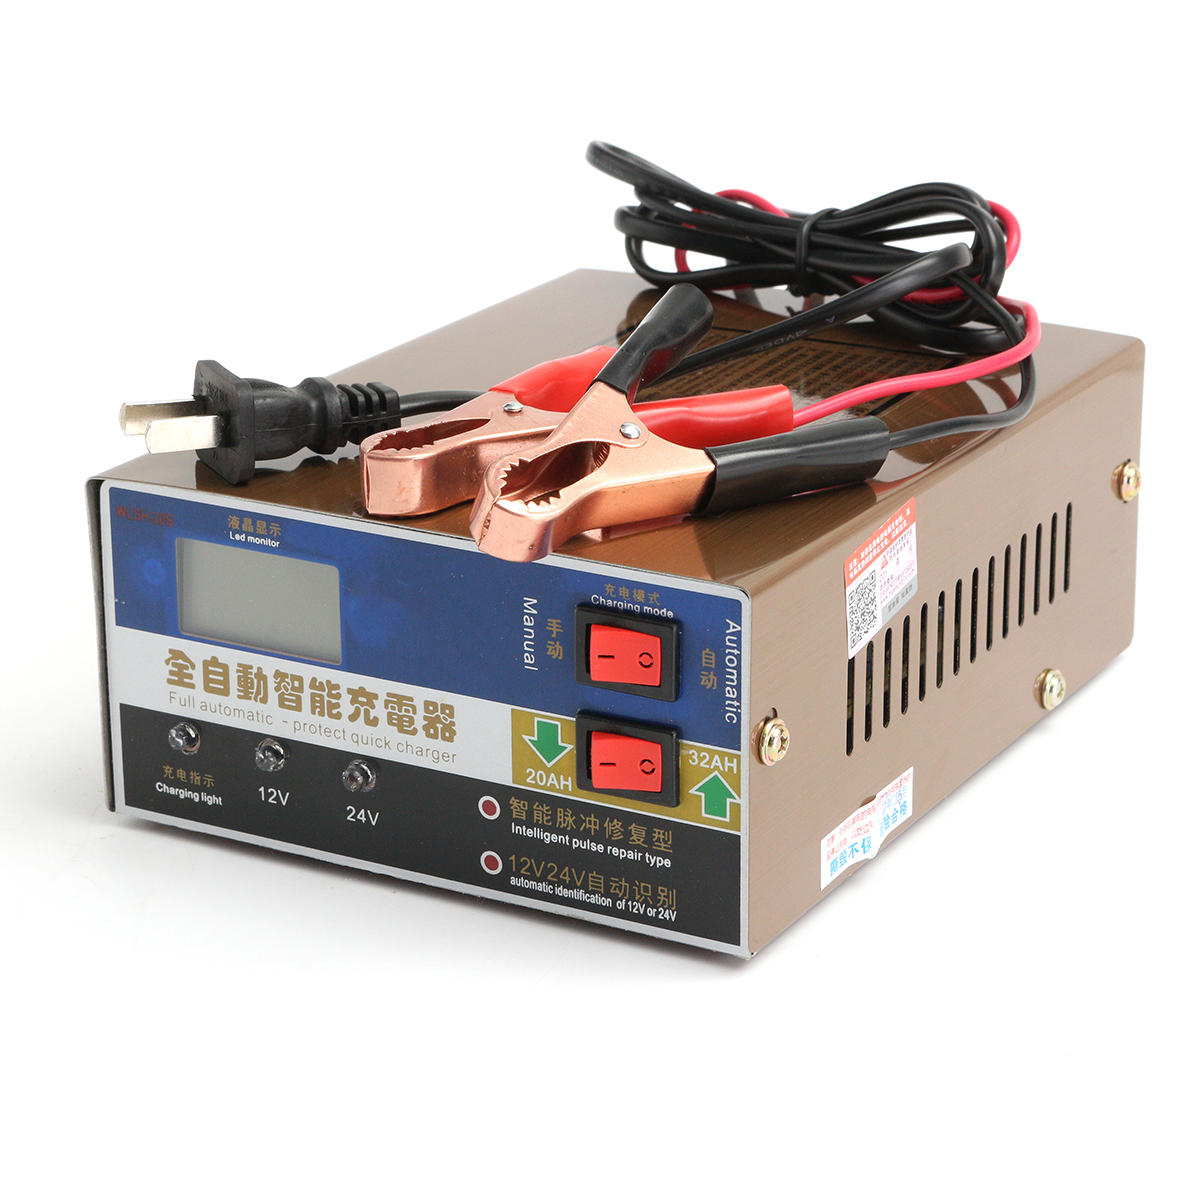 best price,12v/24v,100ah,car,motorcycle,battery,charger,eu,coupon,price,discount